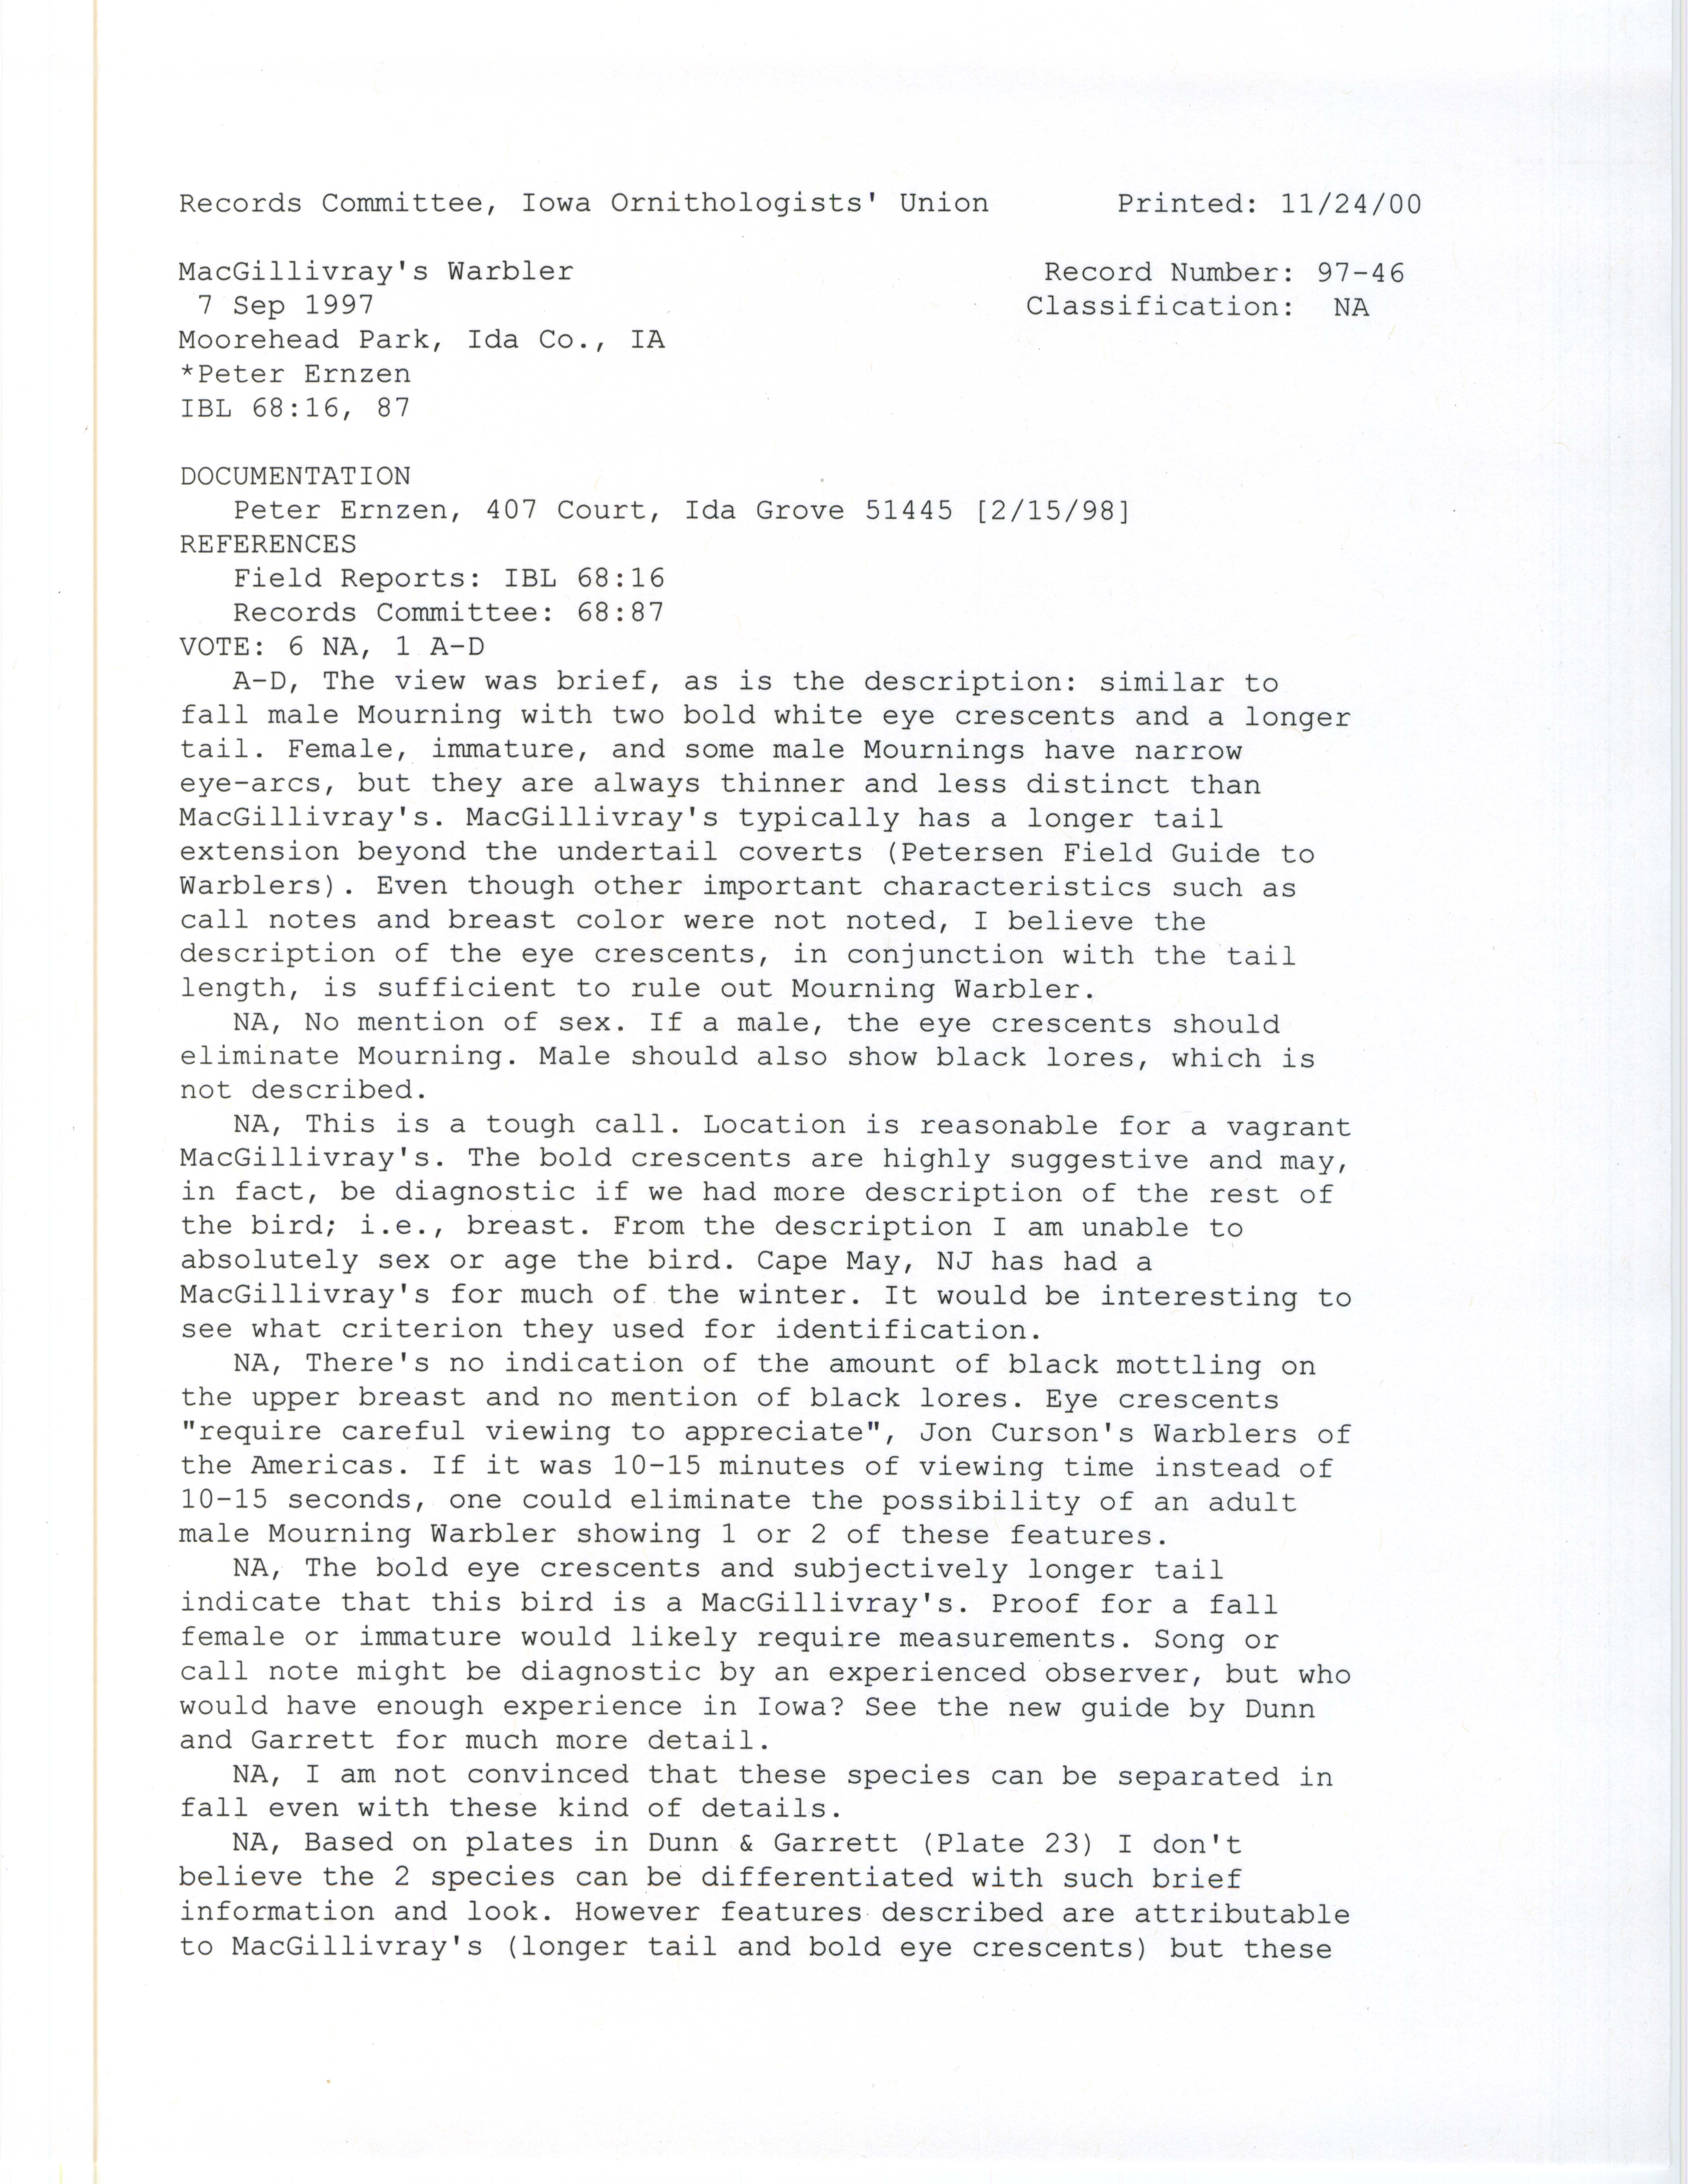 Records Committee review for rare bird sighting for MacGillivray's Warbler at Moorehead Park, 1997